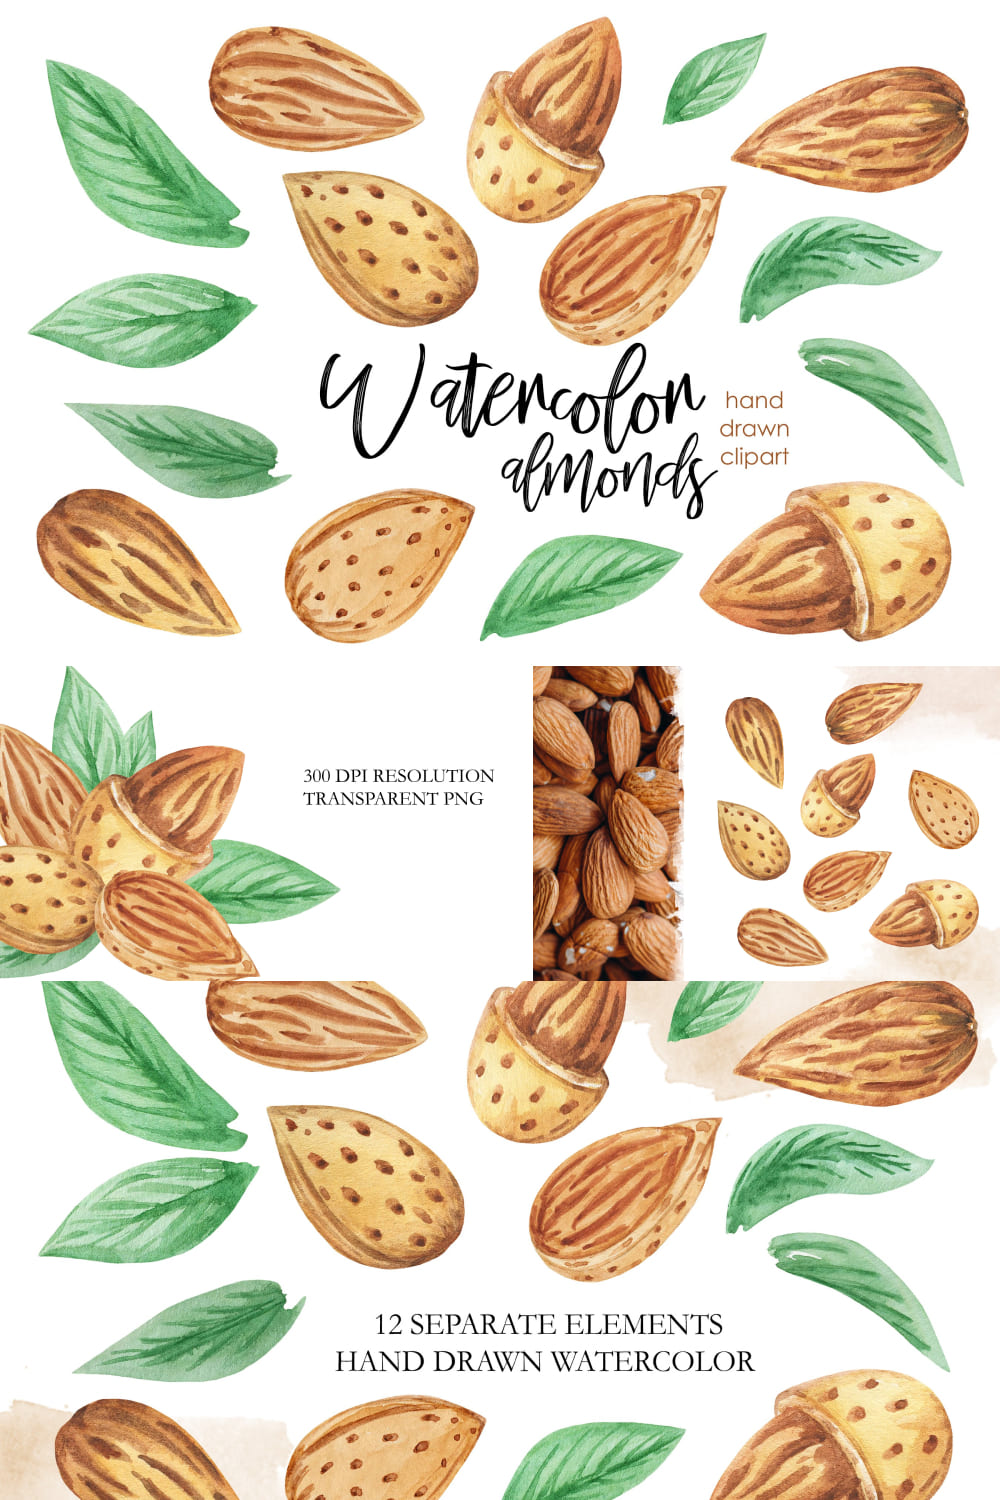 Almond grains are depicted on a transparent background.